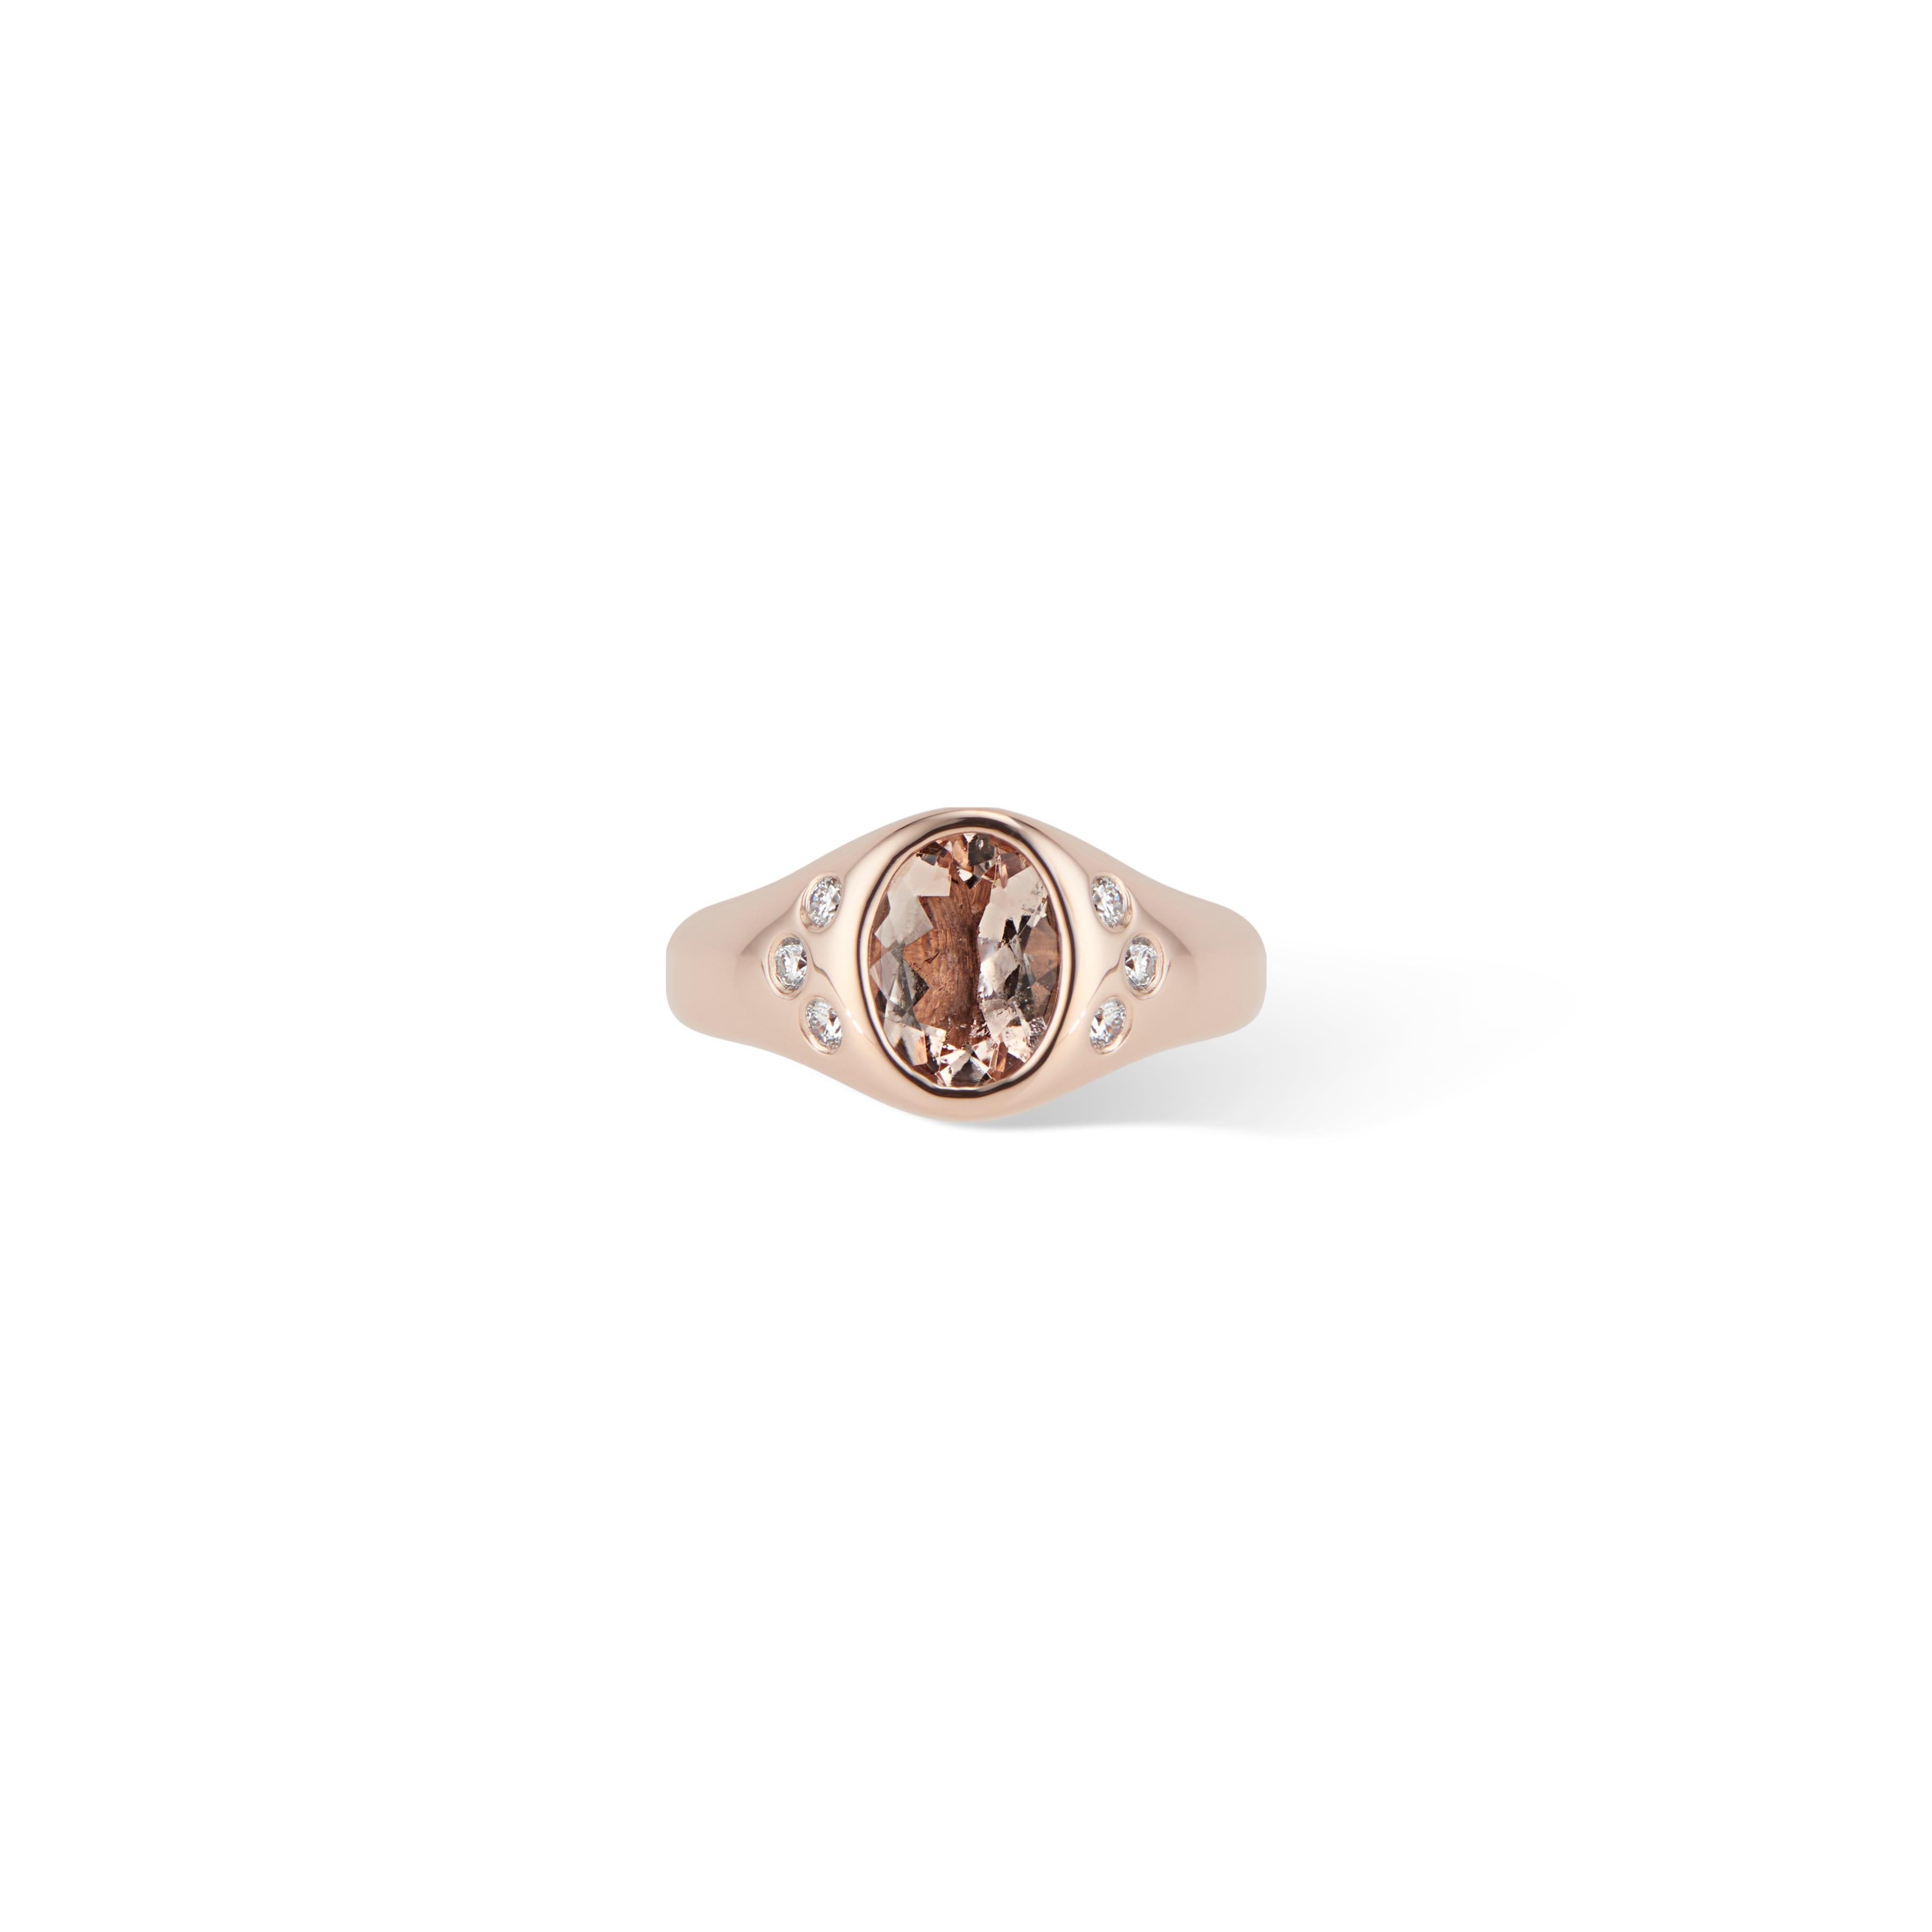 This stunning rose gold morganite and diamond ring is a modern update on the classic signet pinky ring.

Featuring a beautiful peach hued oval morganite and 6 sparkling white diamonds all bezel set in a high polished rose gold setting, this ring